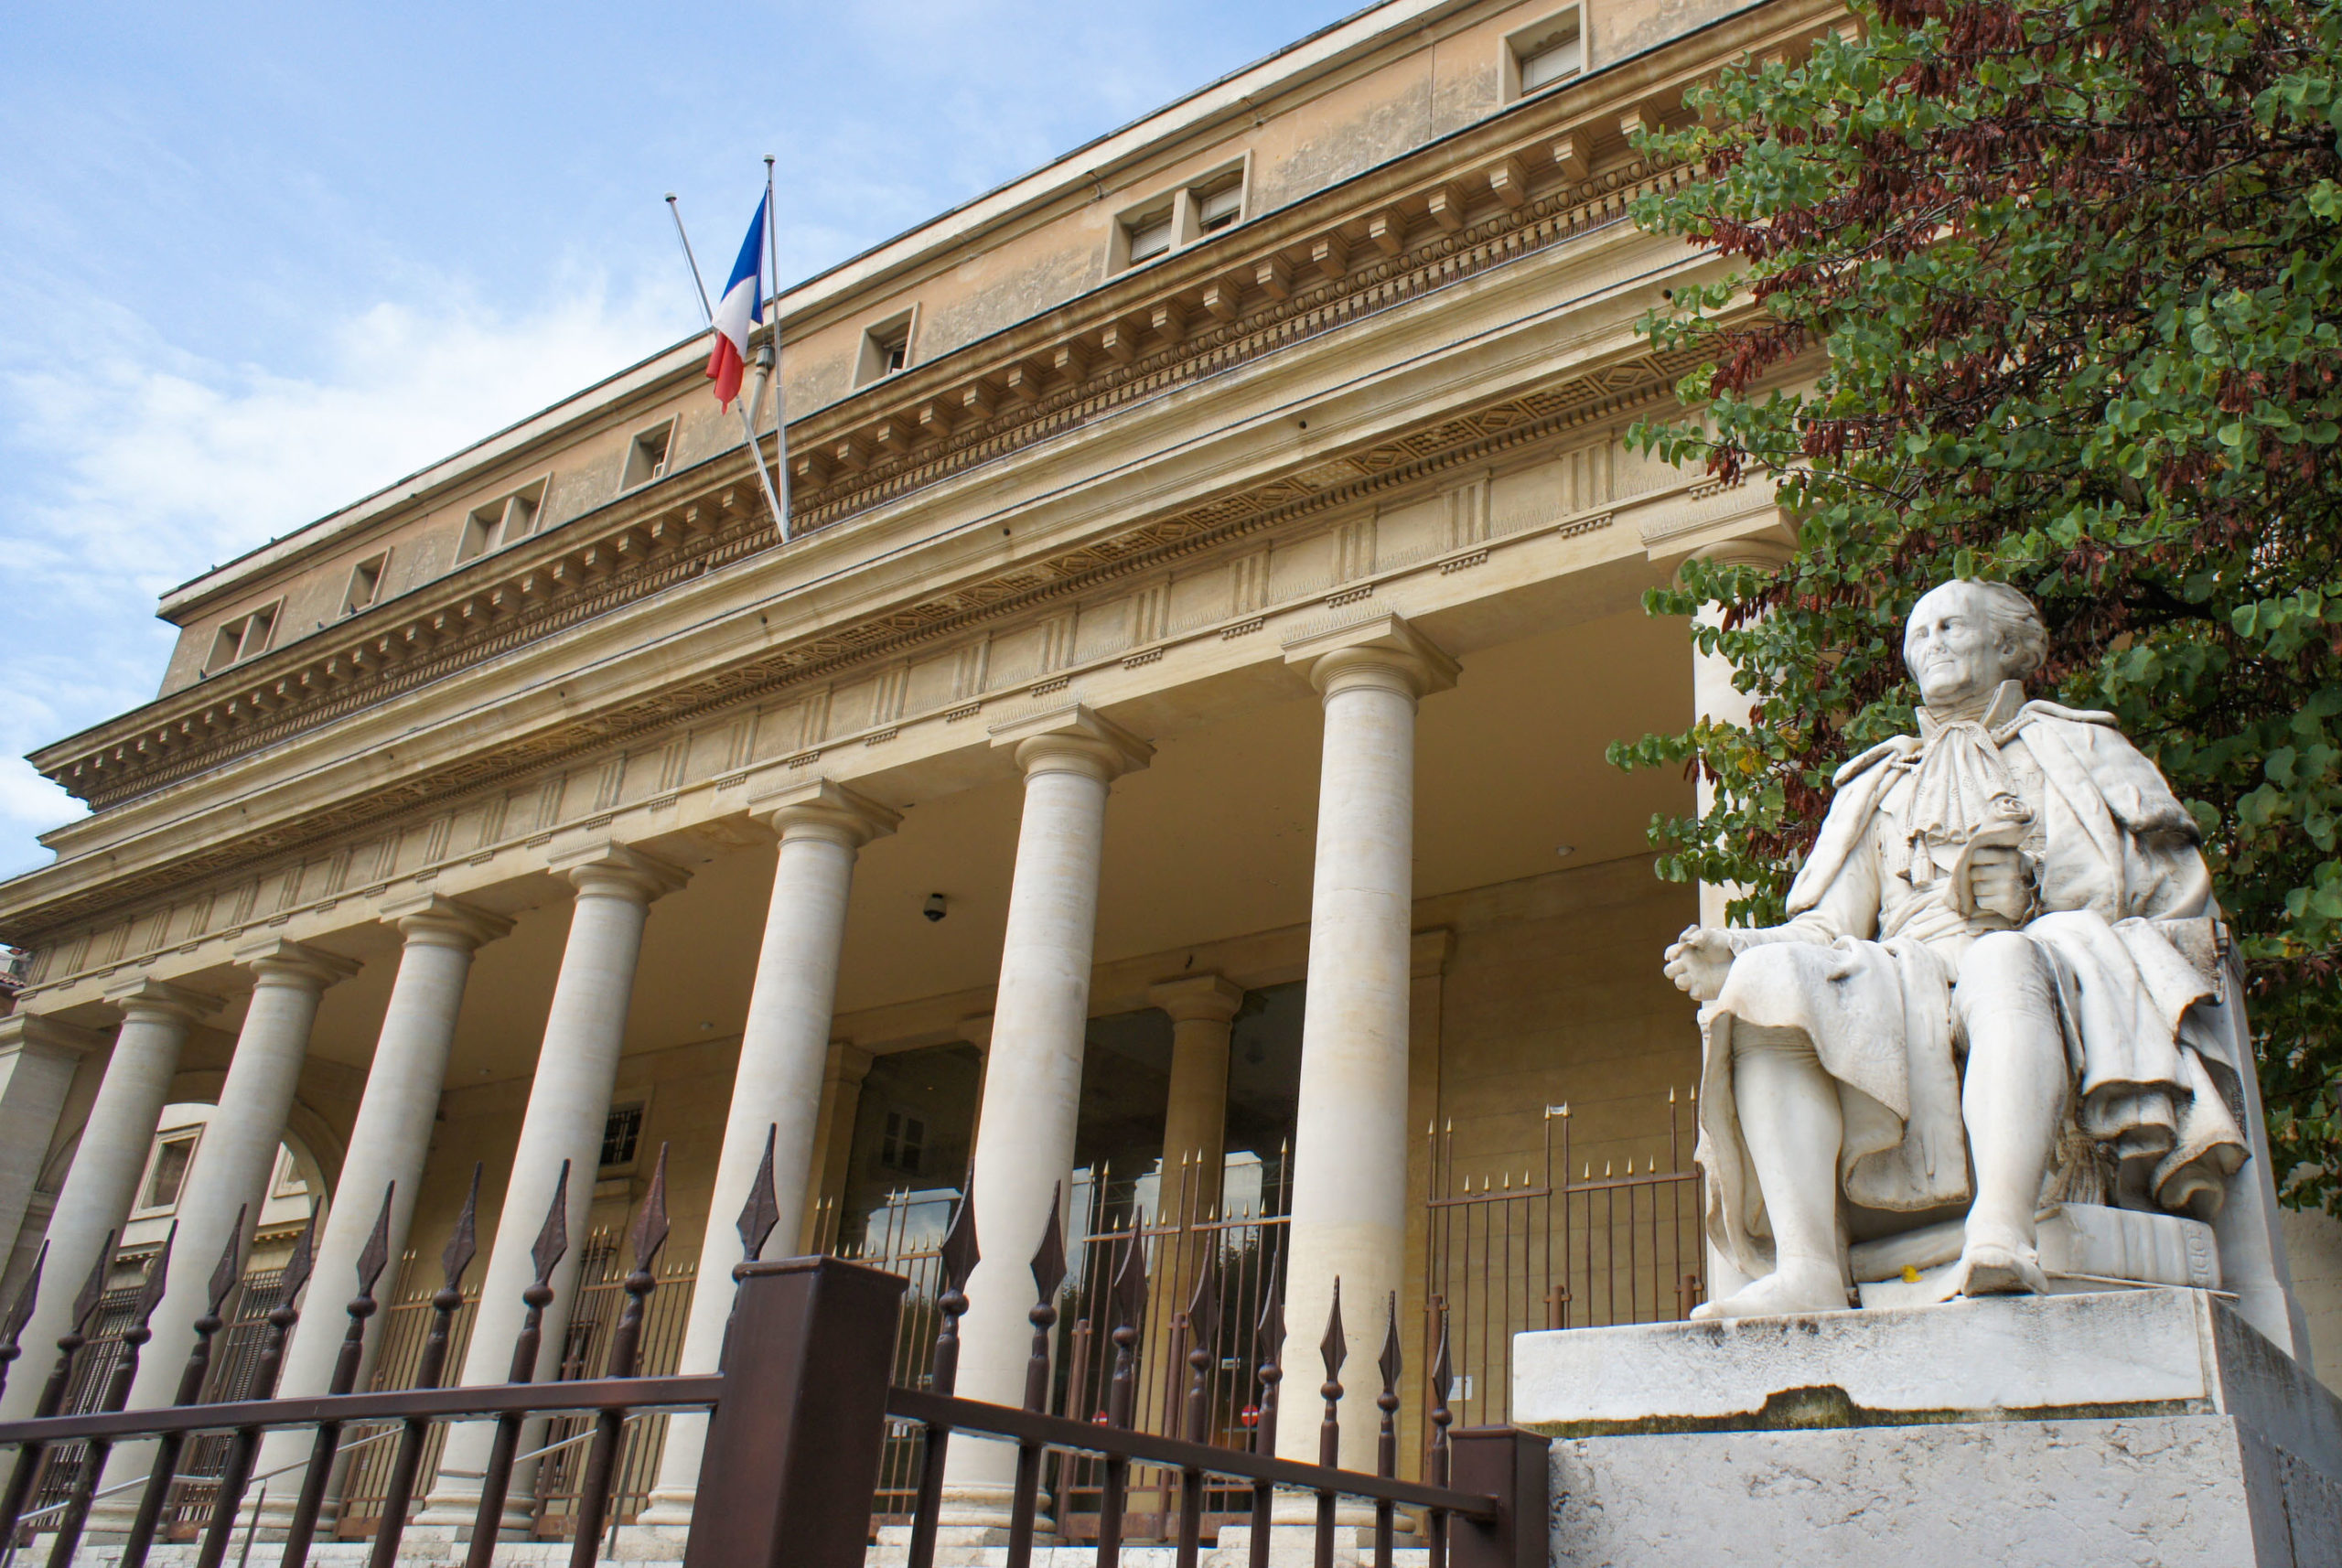 Aix-en-Provence Old Town: Palais de Justice © JM Campaner - licence [CC BY-SA 3.0] from Wikimedia Commons